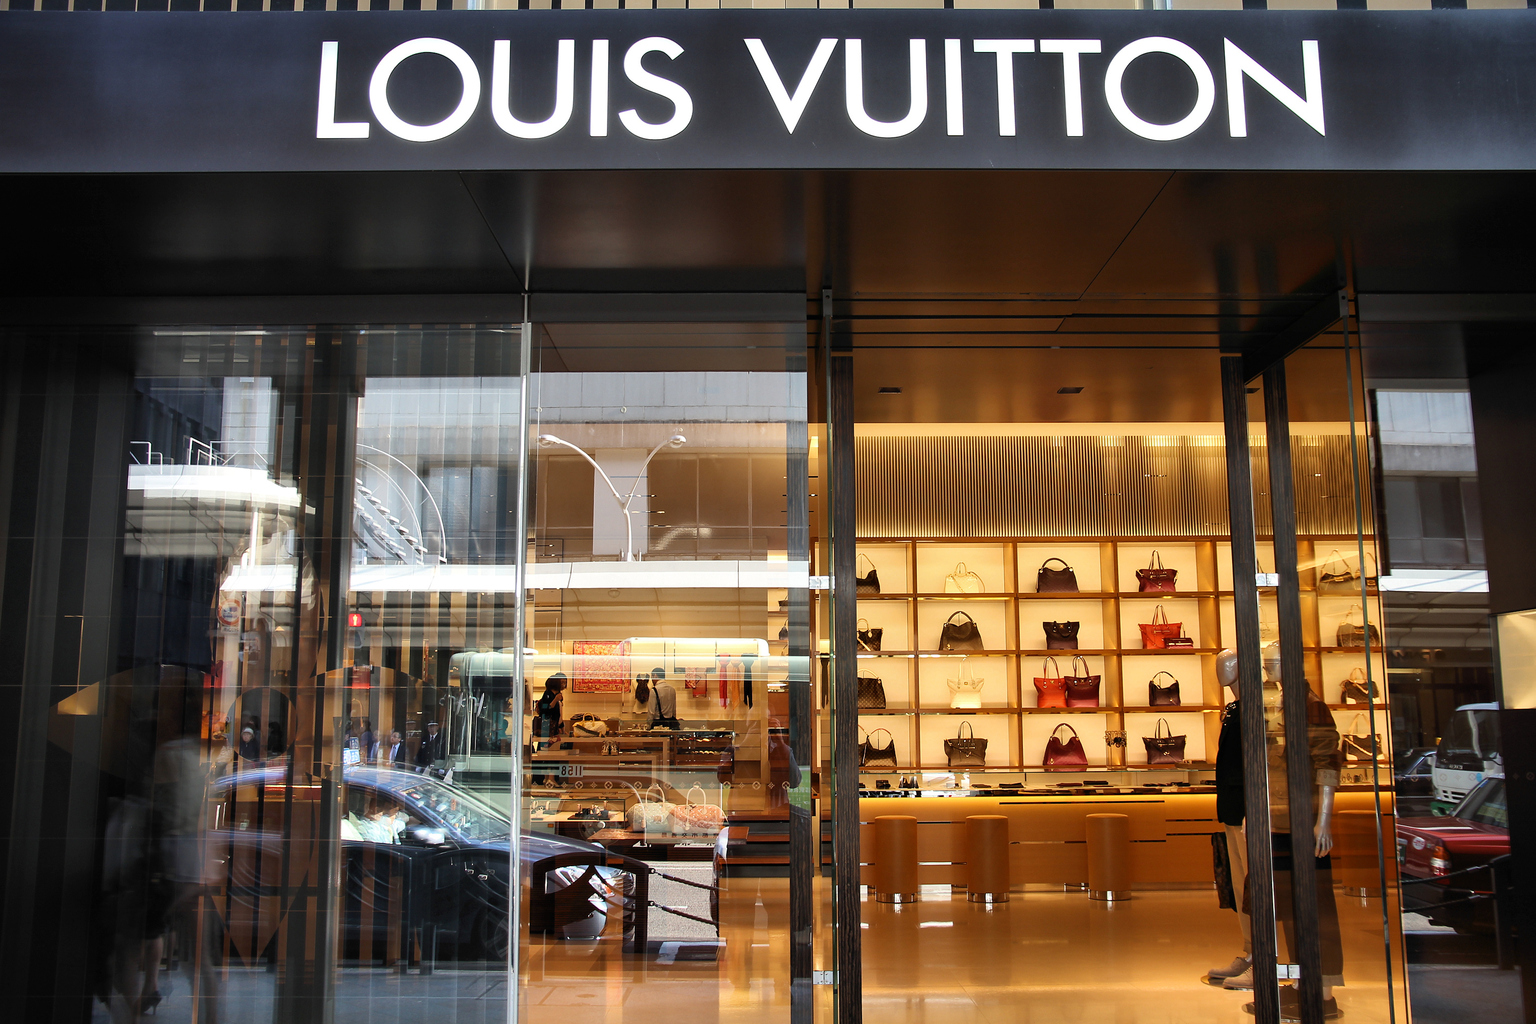 LVMH - Moët Hennessy Louis Vuitton SA: Stock Market News and Information